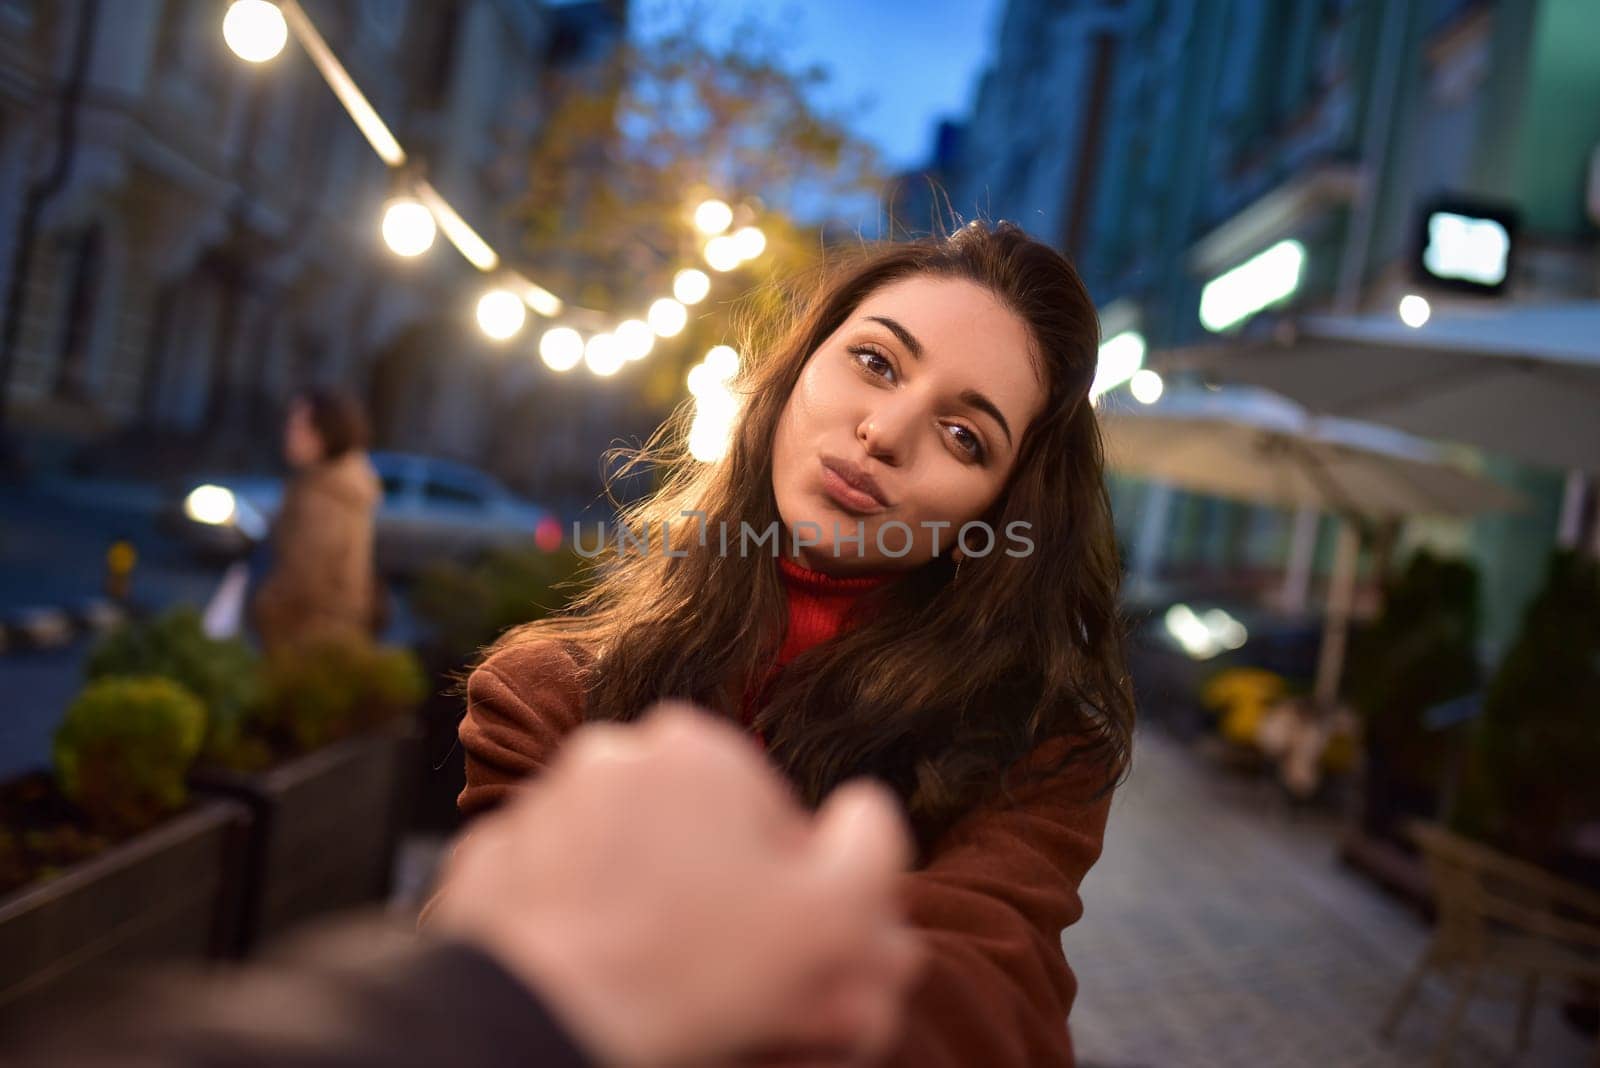 follow me. Beautiful romantic brunette girl in red coat takes her boyfriend's hands while walking in the evening city by Nickstock